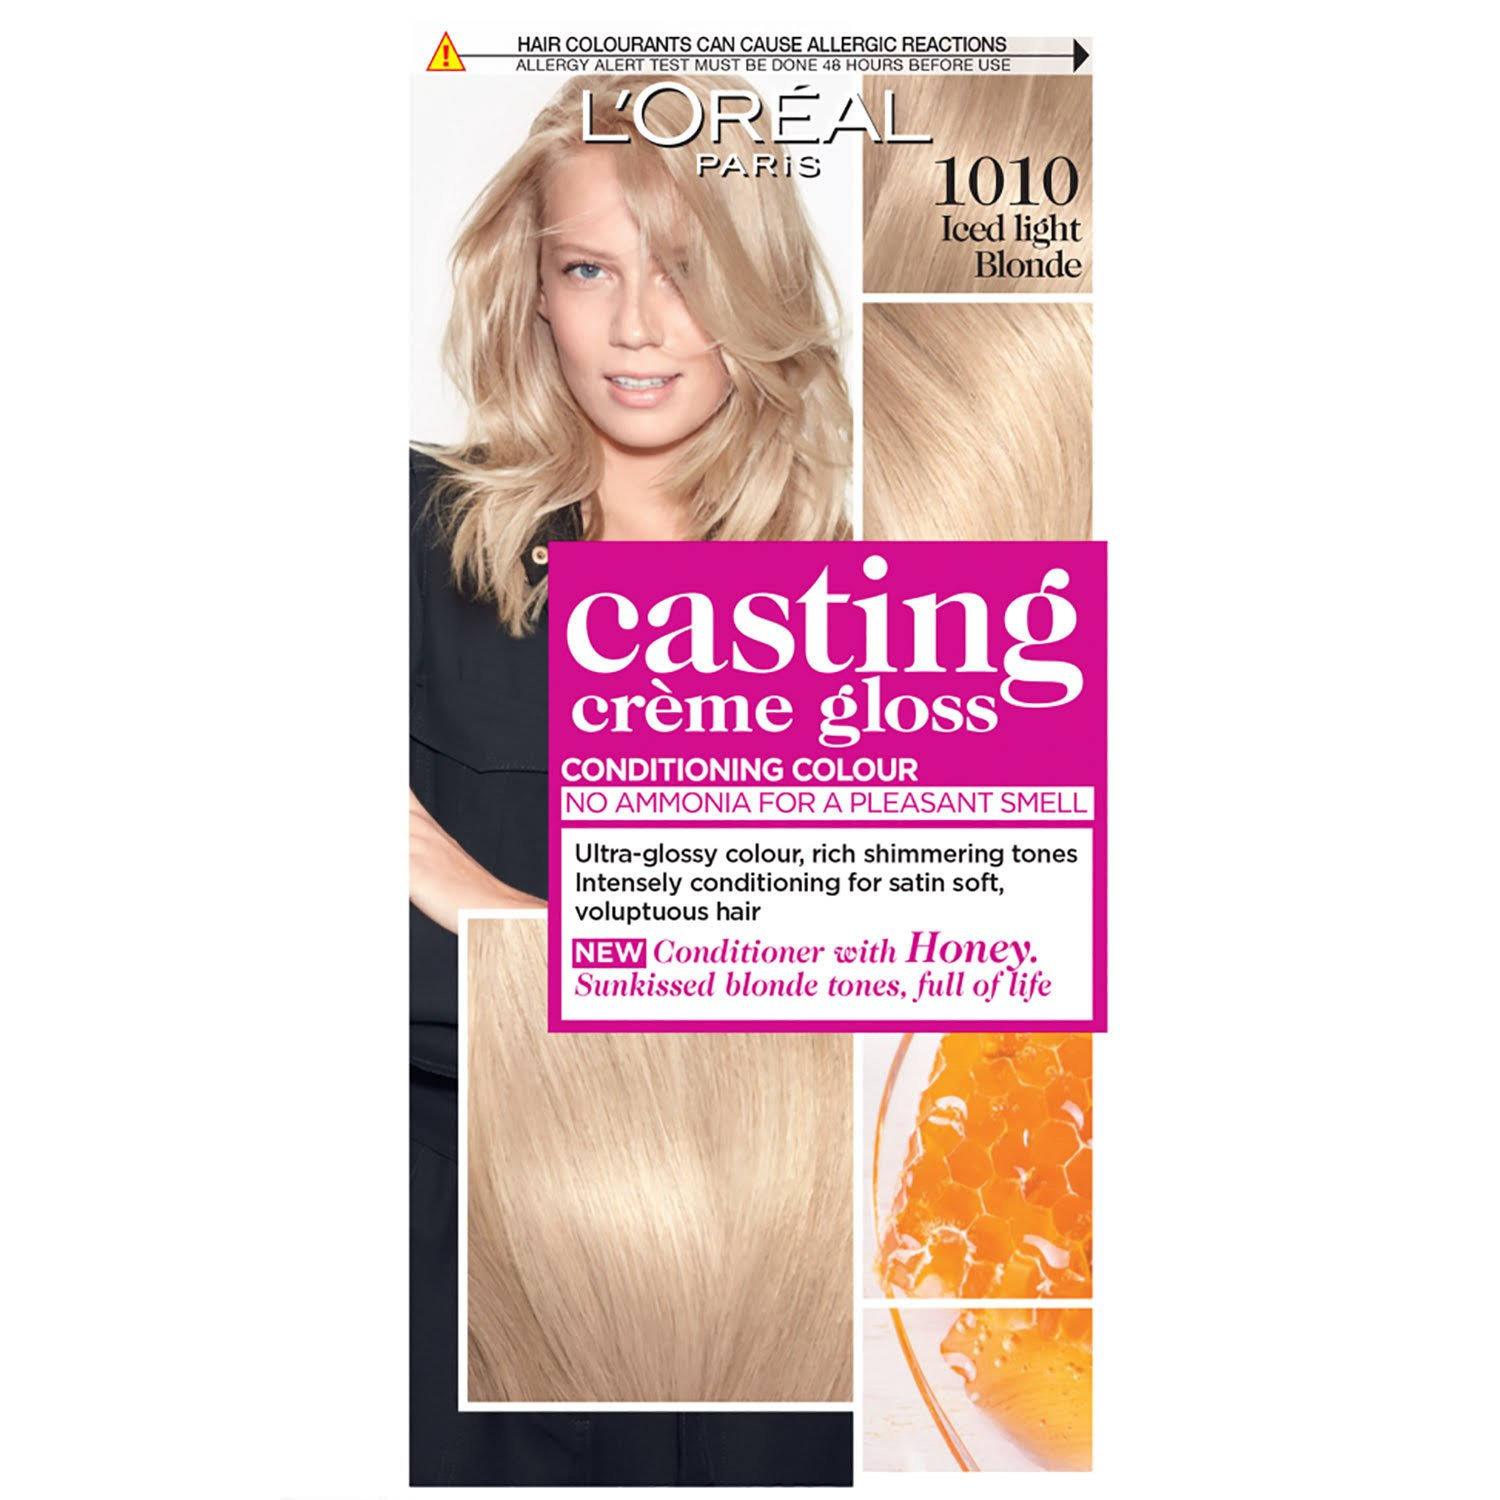 L'Oreal Paris Casting Creme Gloss Conditioning Colour - 1010 Light Iced Blonde